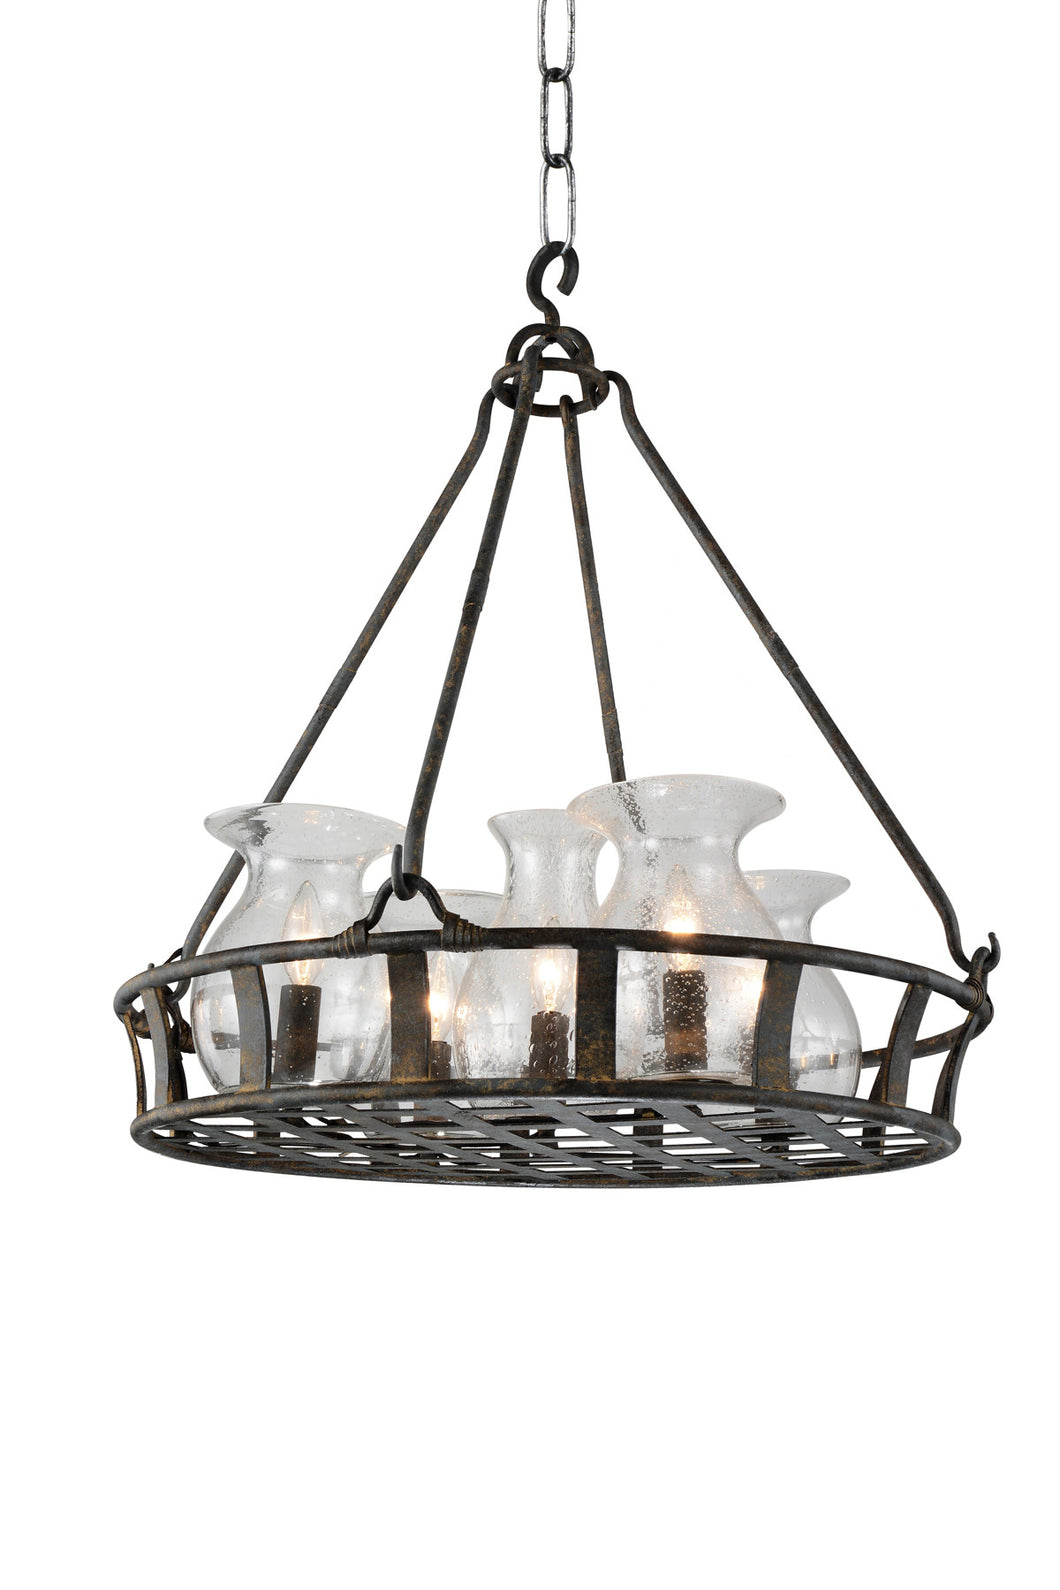 6 Light Up Chandelier with Antique Black finish